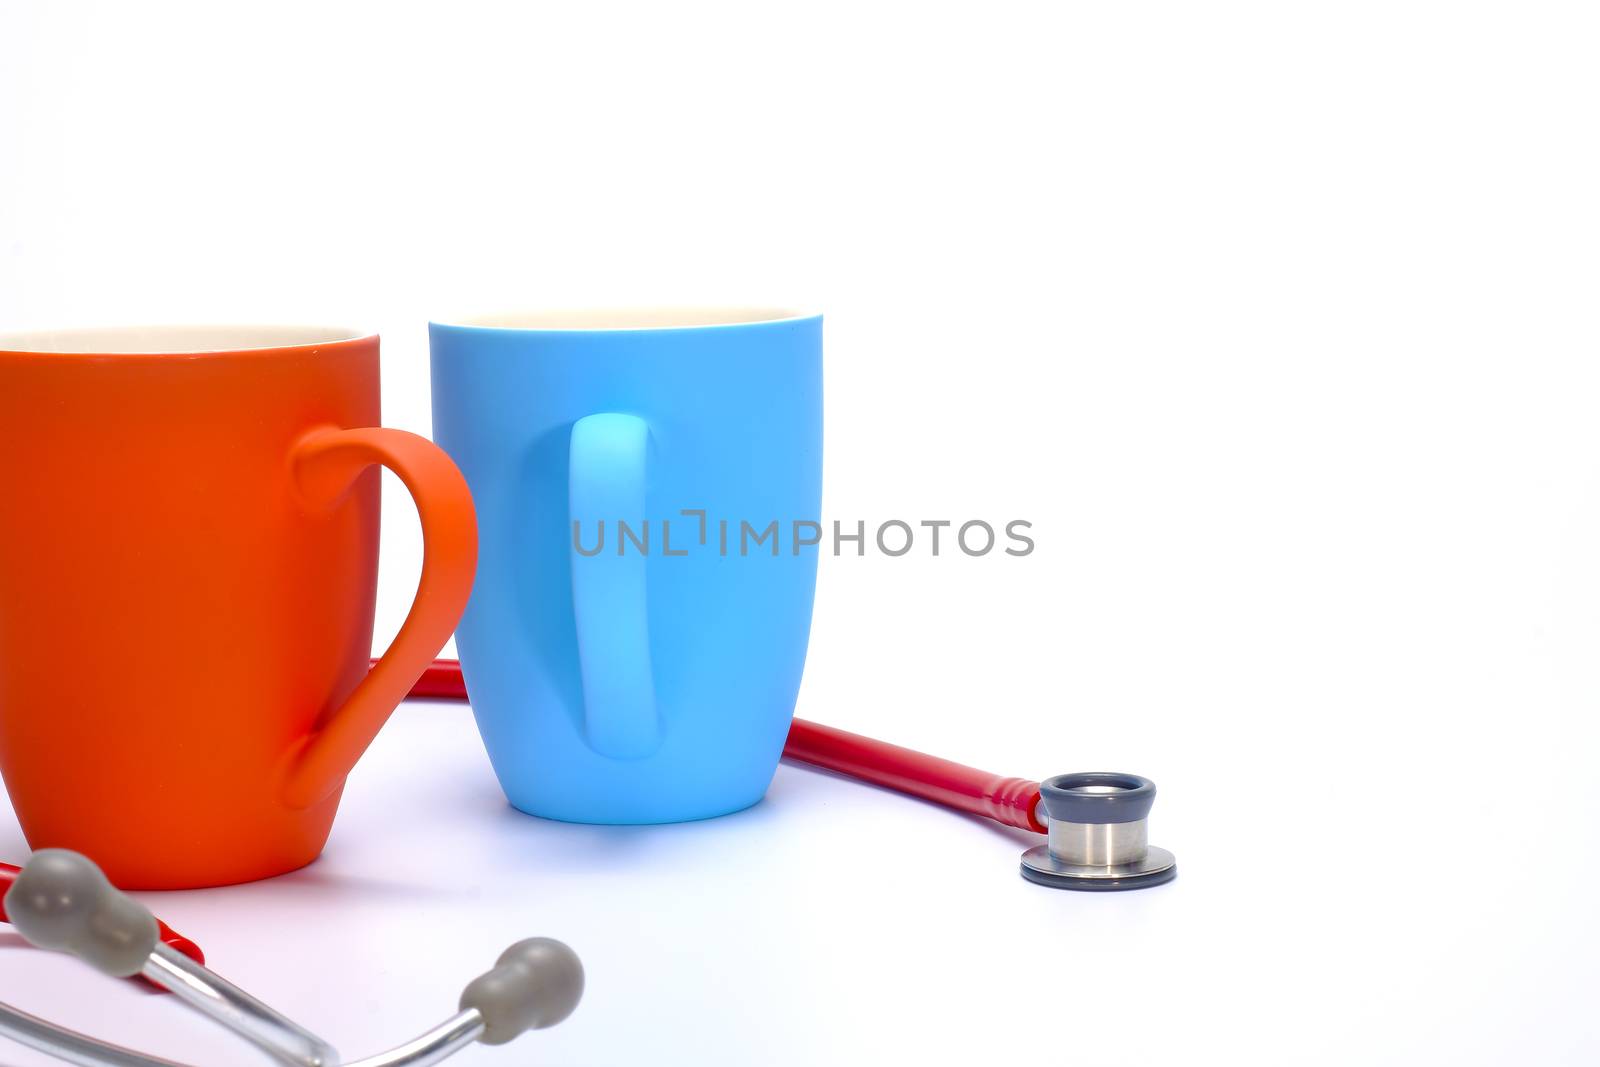 a red stethoscope and two colorful coffee mugs